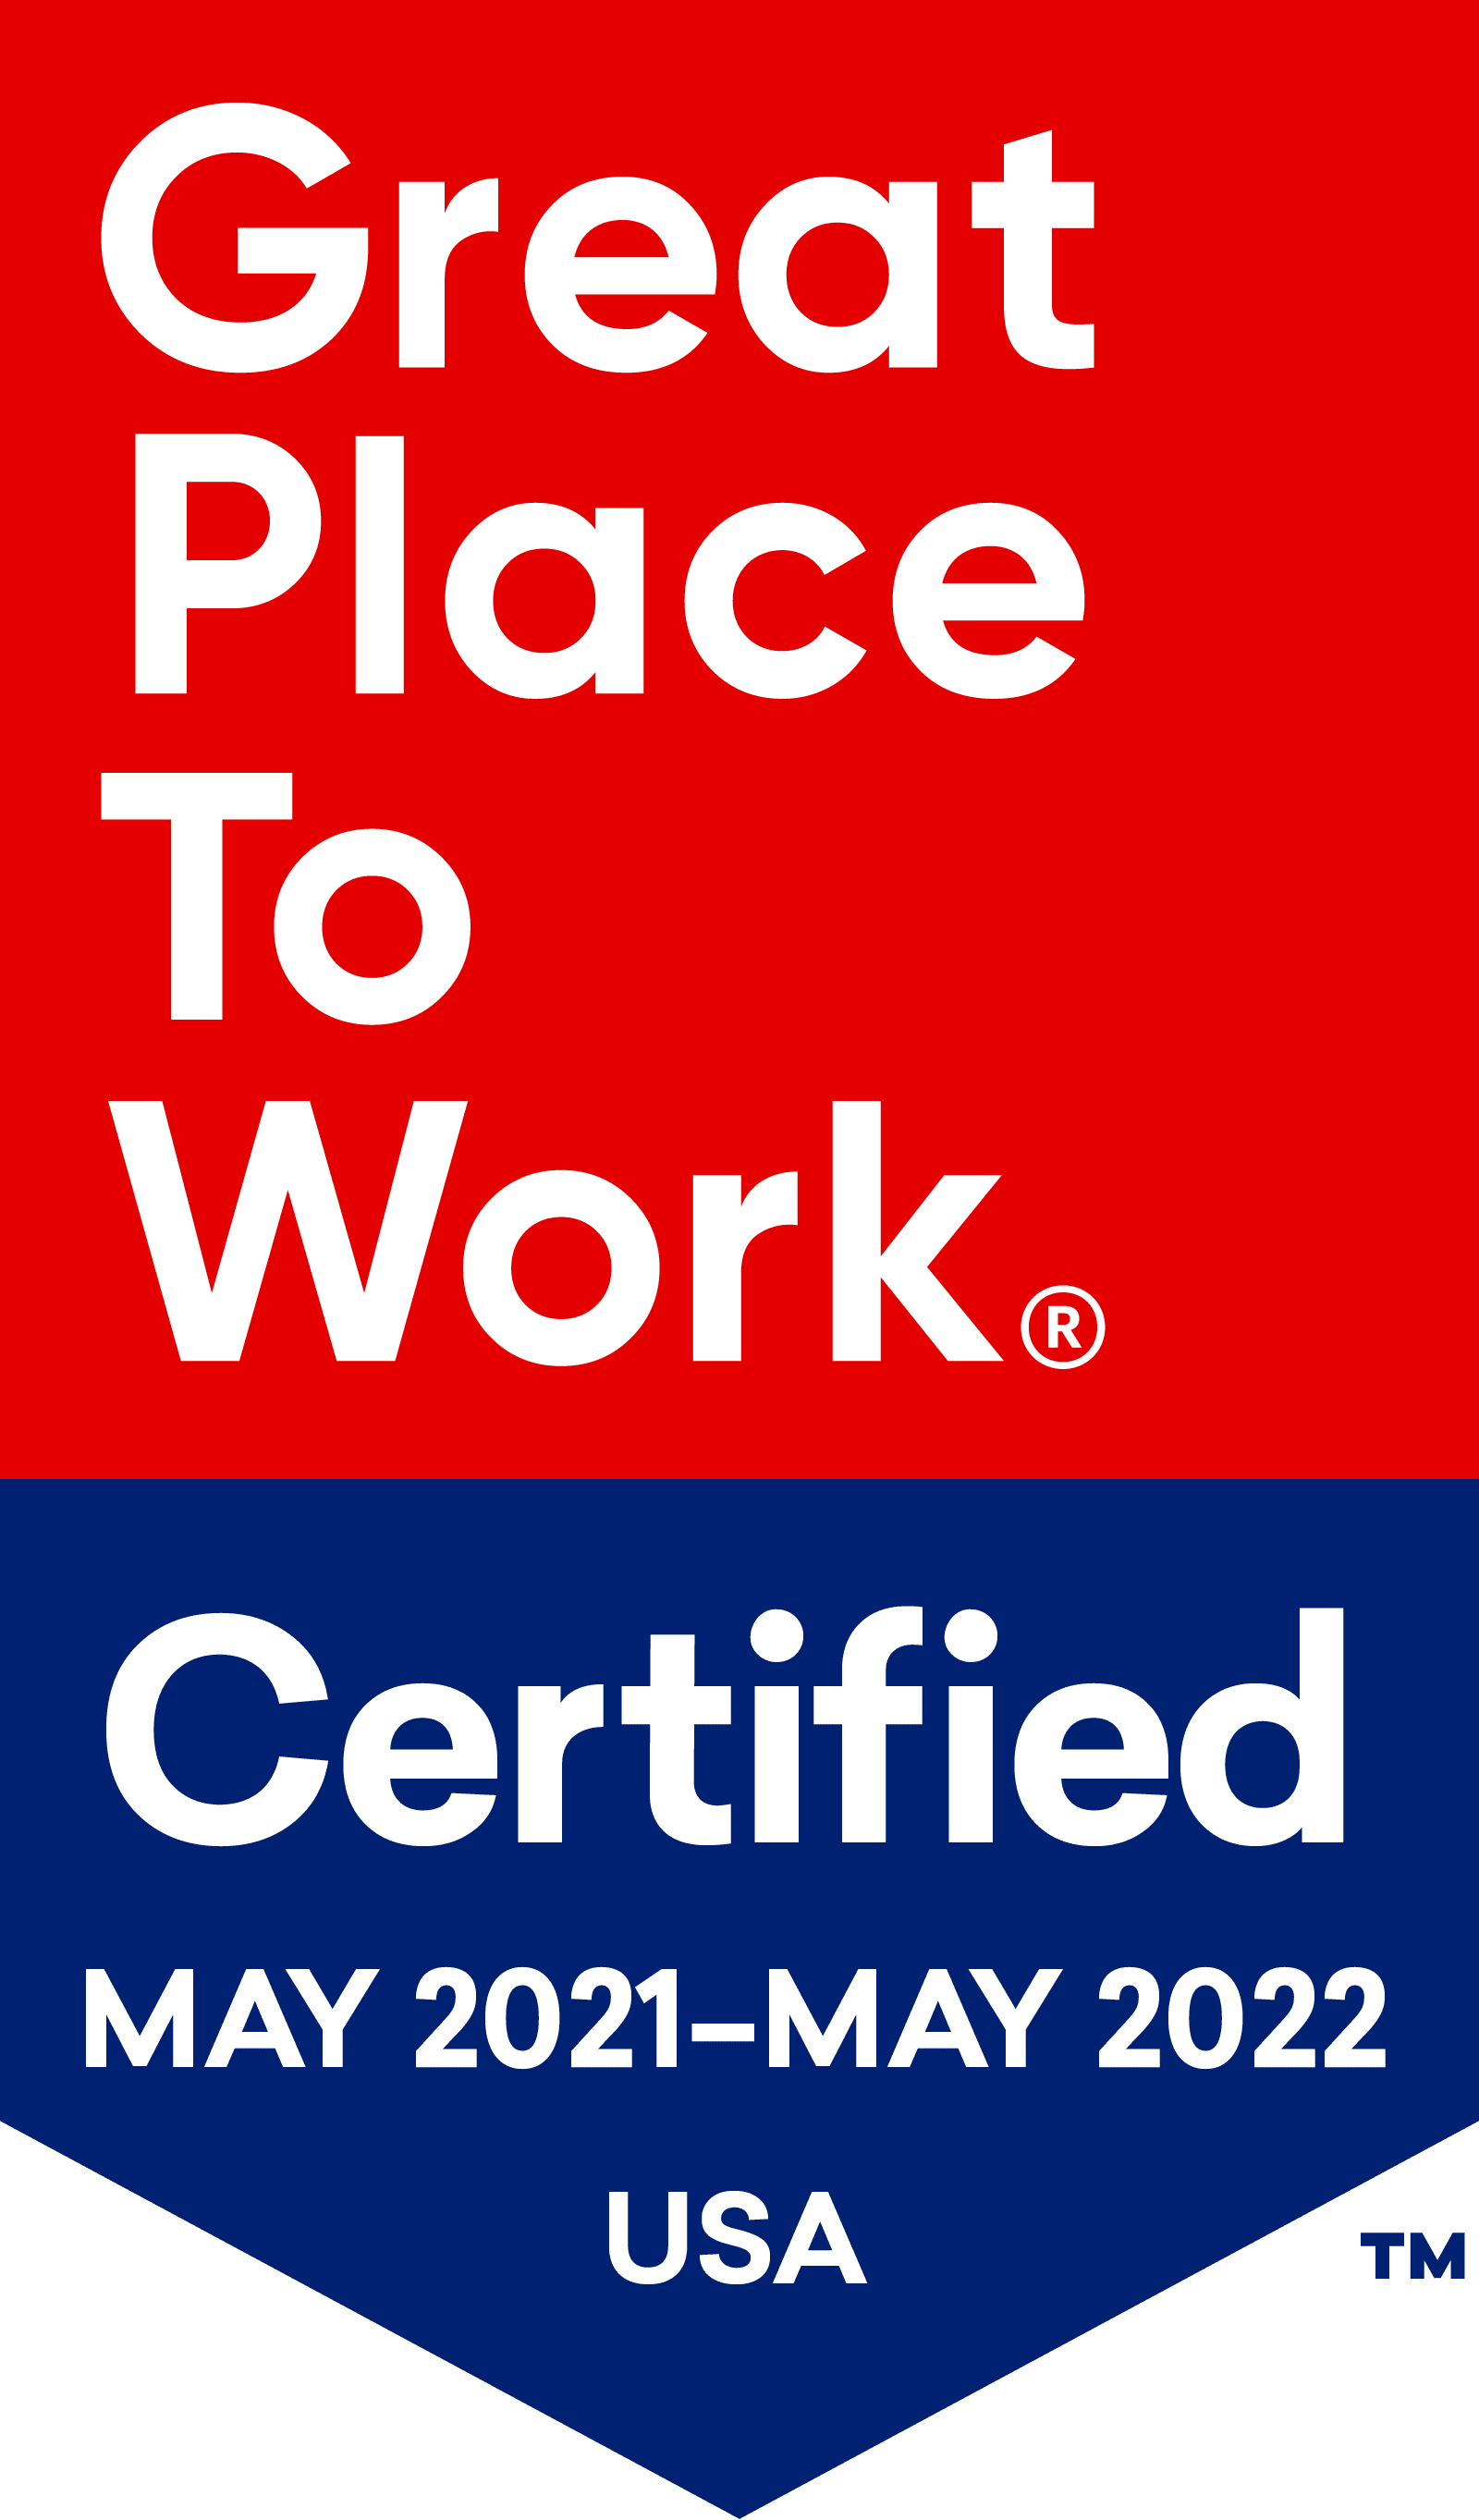 Northgate Plaza is Great Place To Work Certified